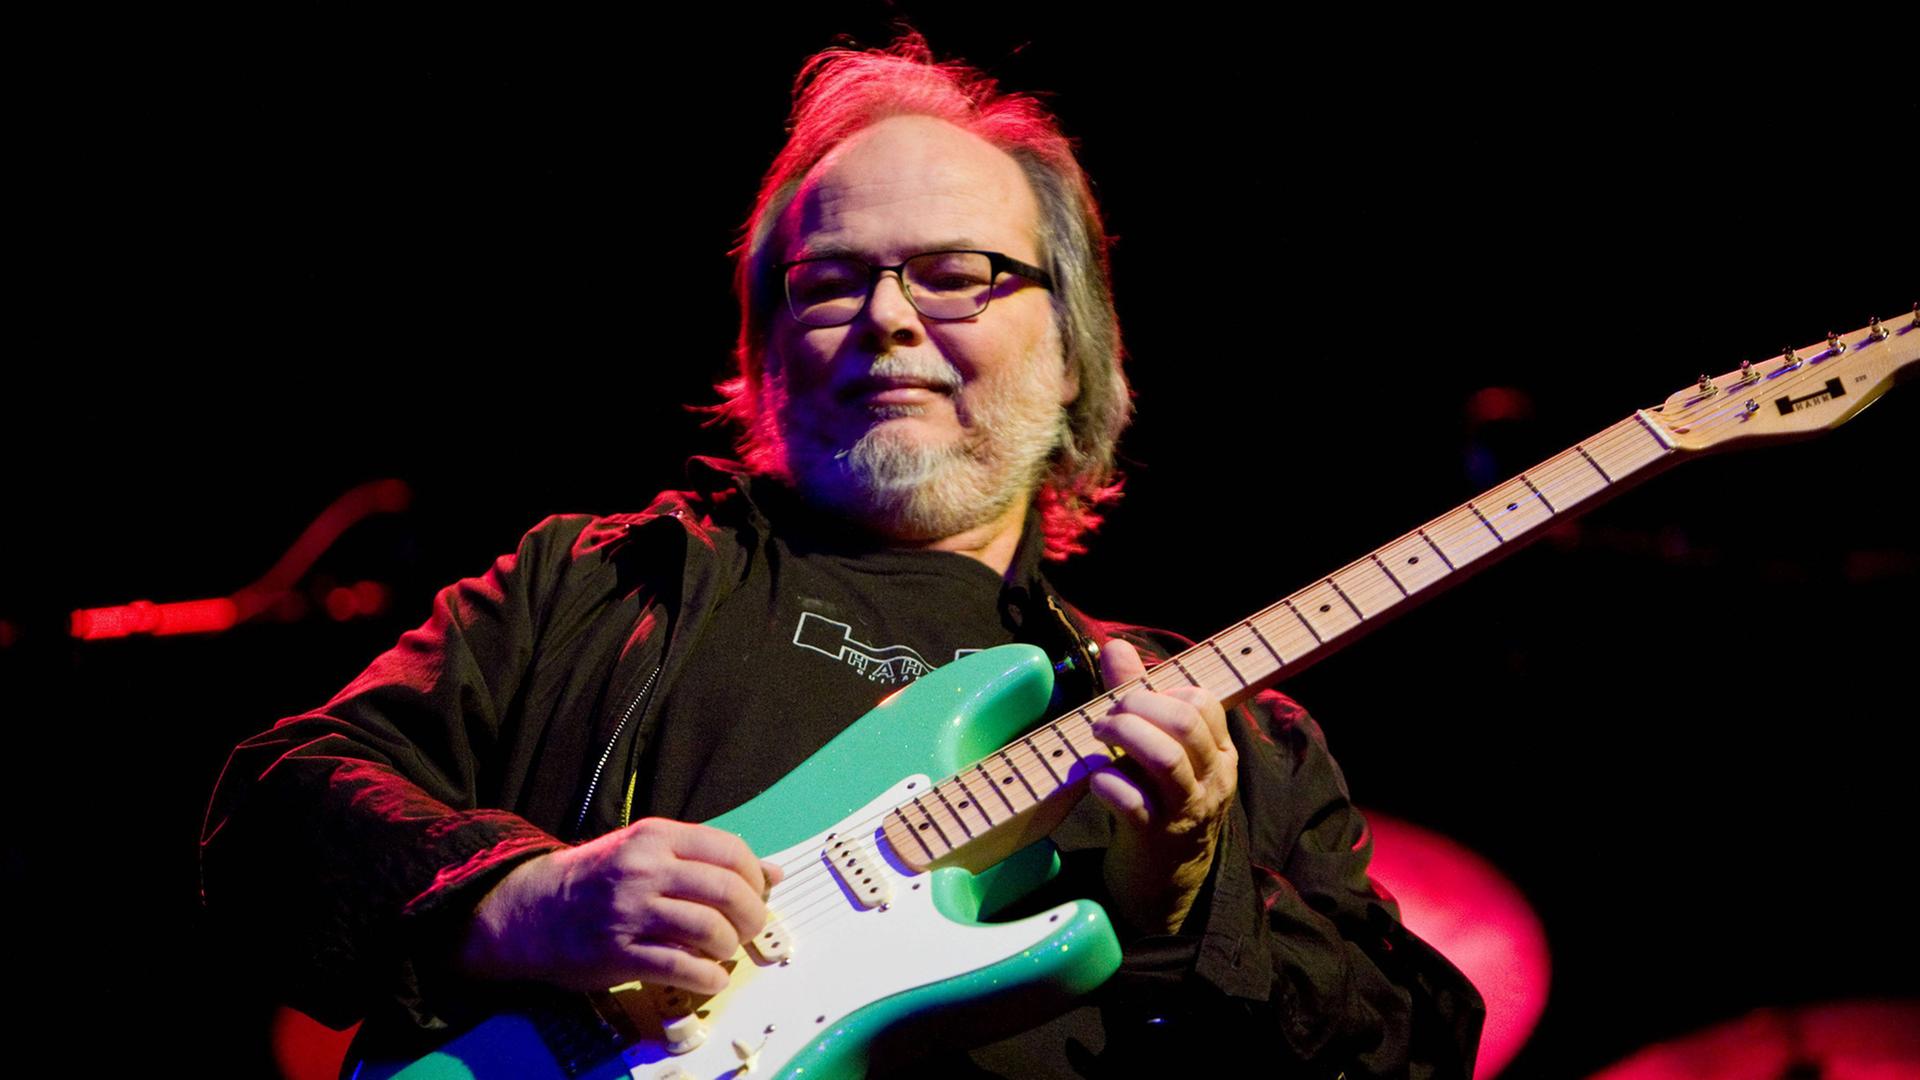 Oct. 14, 2011 - Valley Center, CA, US - Rock and Roll Hall of Fame members Steely Dan closed out the U.S. leg of their Shuffle Diplomacy Tour in San Diego on October 14, 2011. Pictured: Walter Becker.